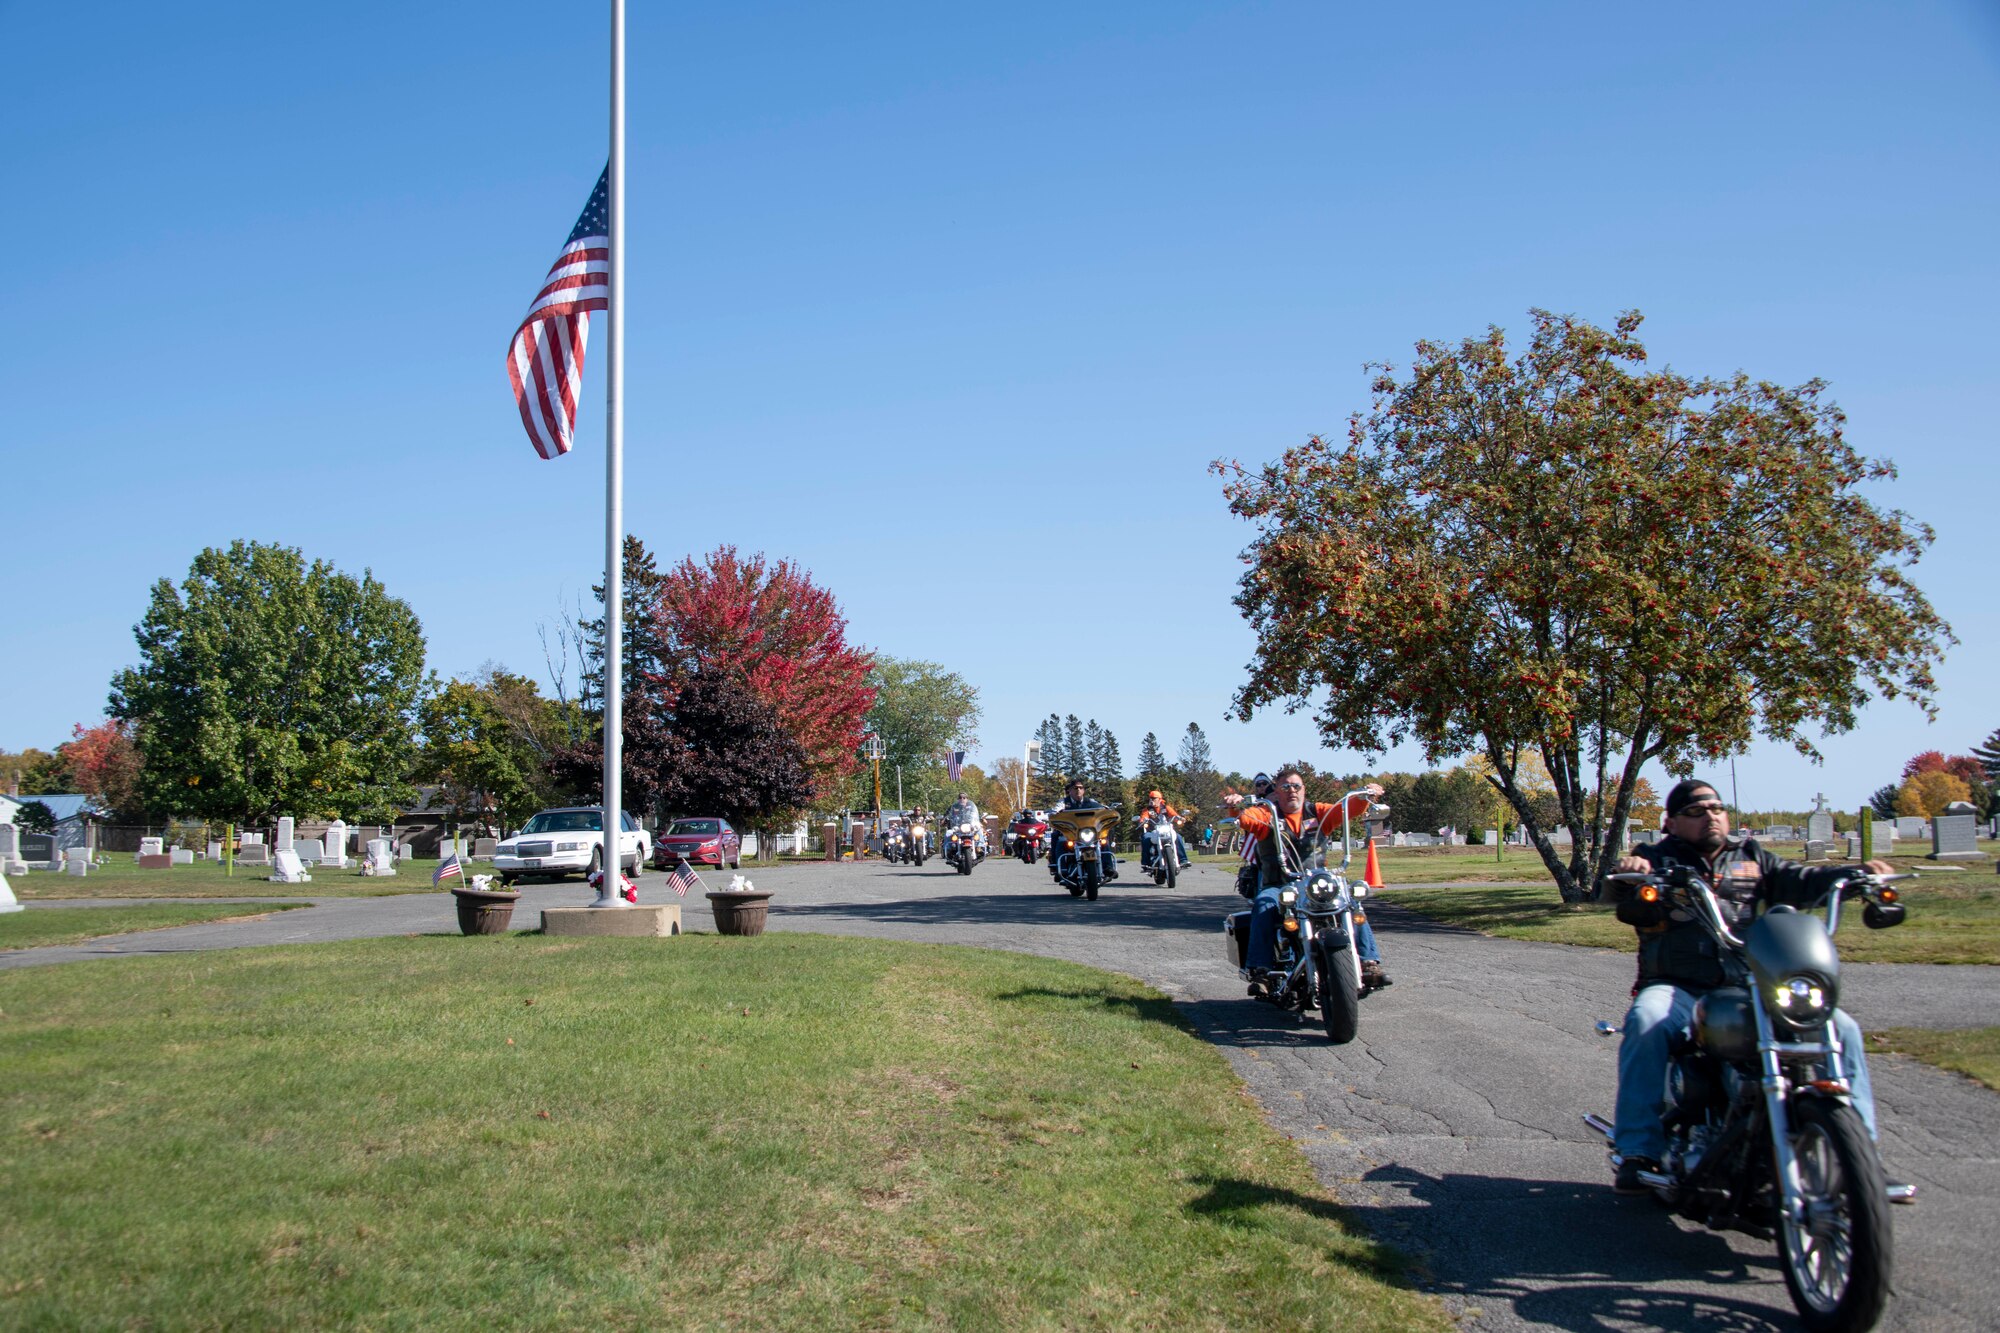 Motorcyclists from the Patriot Riders escort the procession team for the funeral of U.S. Army Air Forces 2nd Lt. Ernest Vienneau, former 97th Bombardment Group pilot, at Millinocket, Maine, Oct. 9, 2021. Groups like this form a voluntary honor guard at military burials, to help protect mourners from harassment and fill out the ranks at burials. (U.S. Air Force photo by Staff Sgt. Cody Dowell)